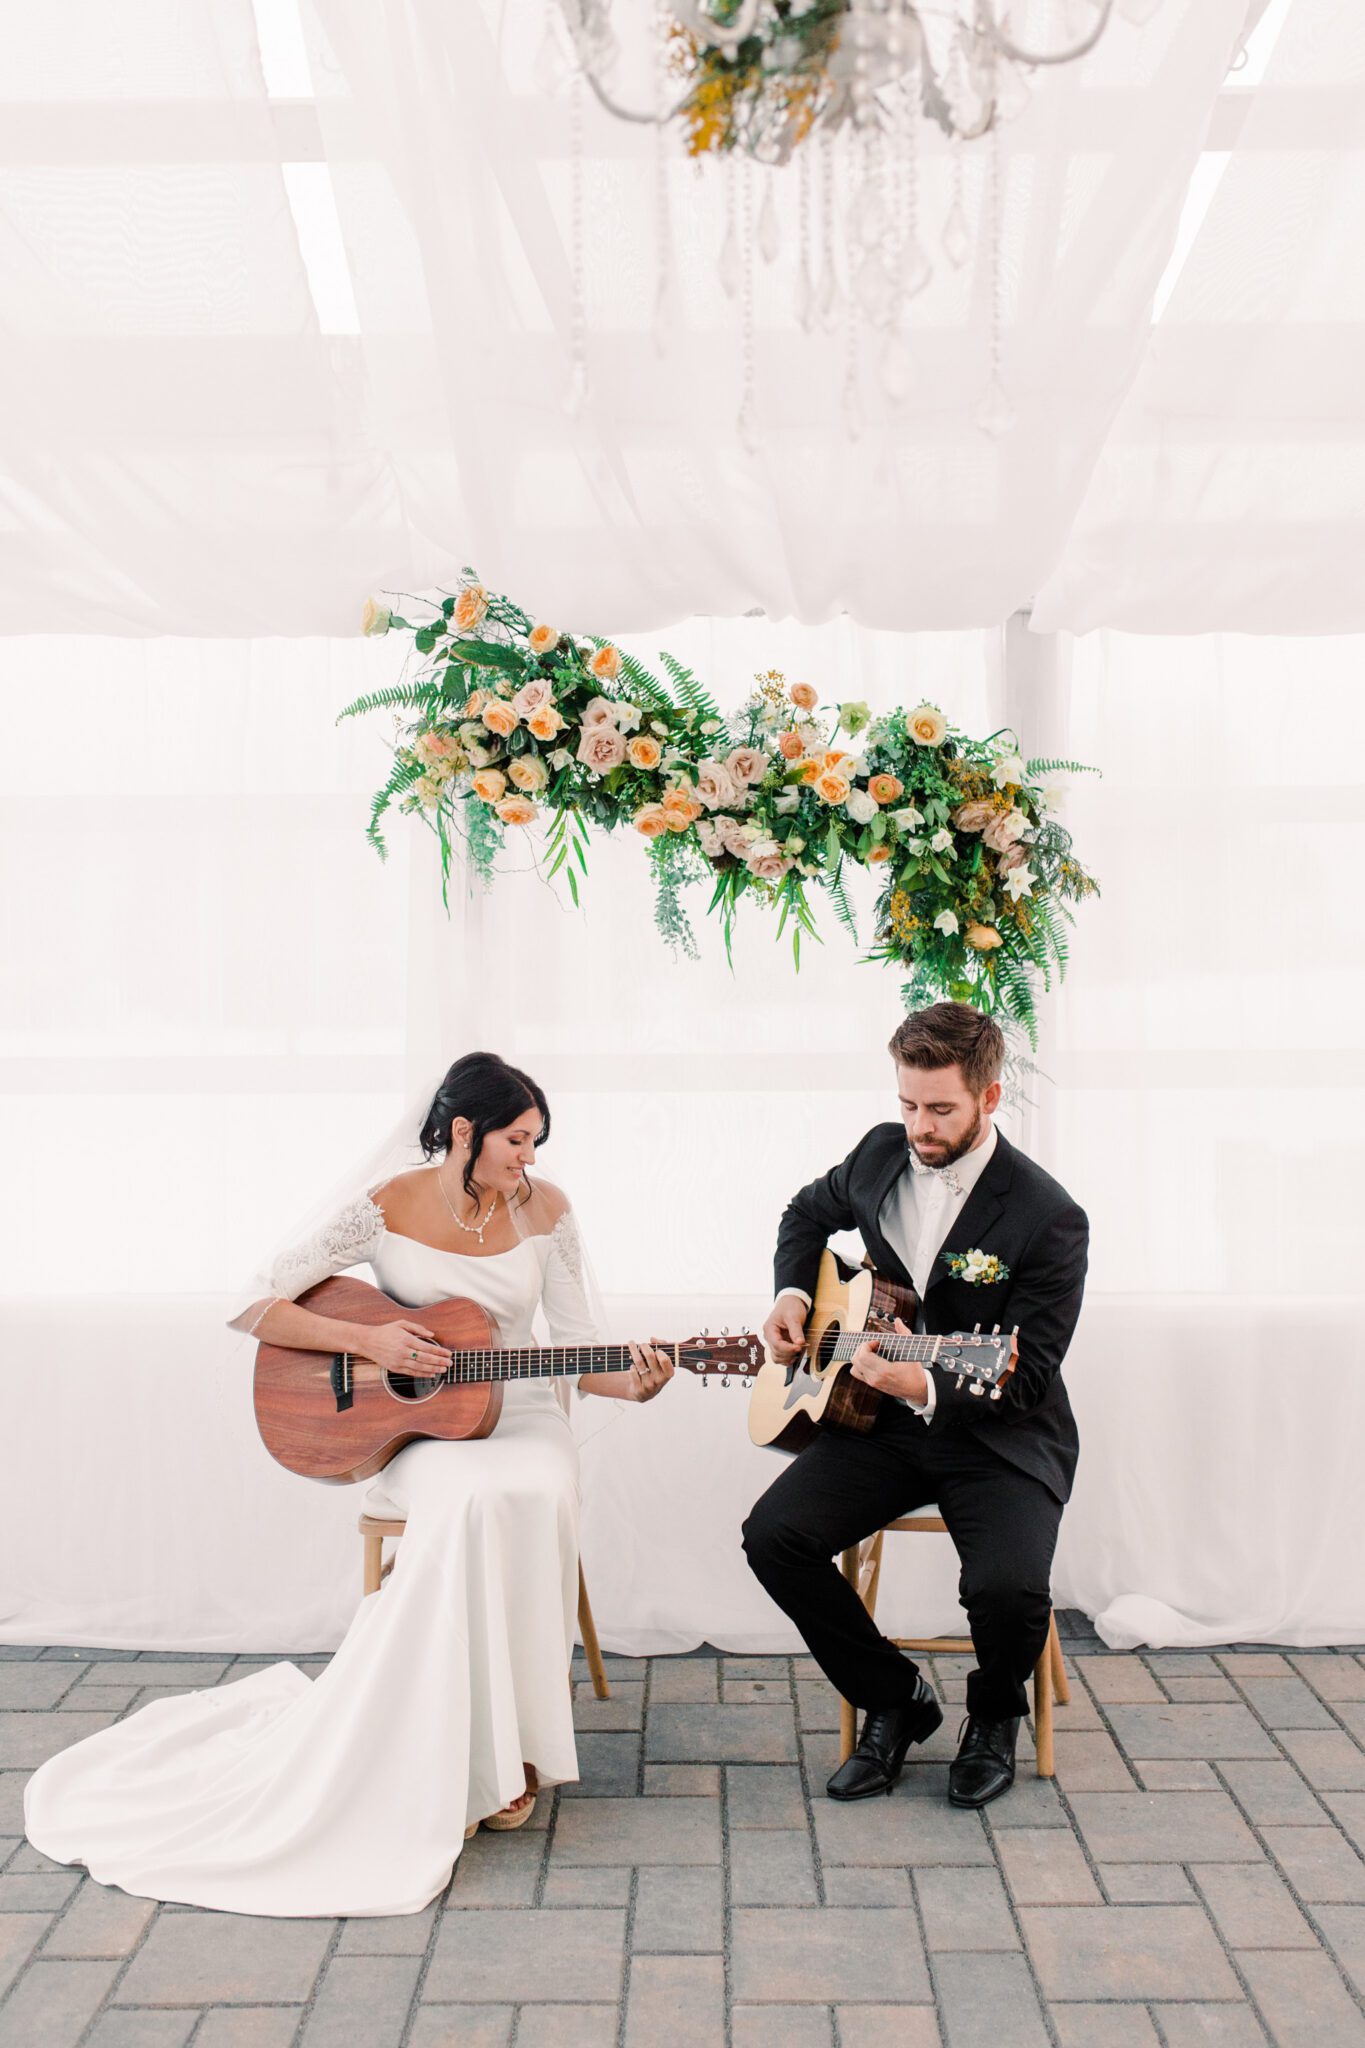 Fun bride and groom playing guitar at summer tented wedding reception in Sunflower & Swallow's elegant, modern greenhouse located in Bezanson, Alberta